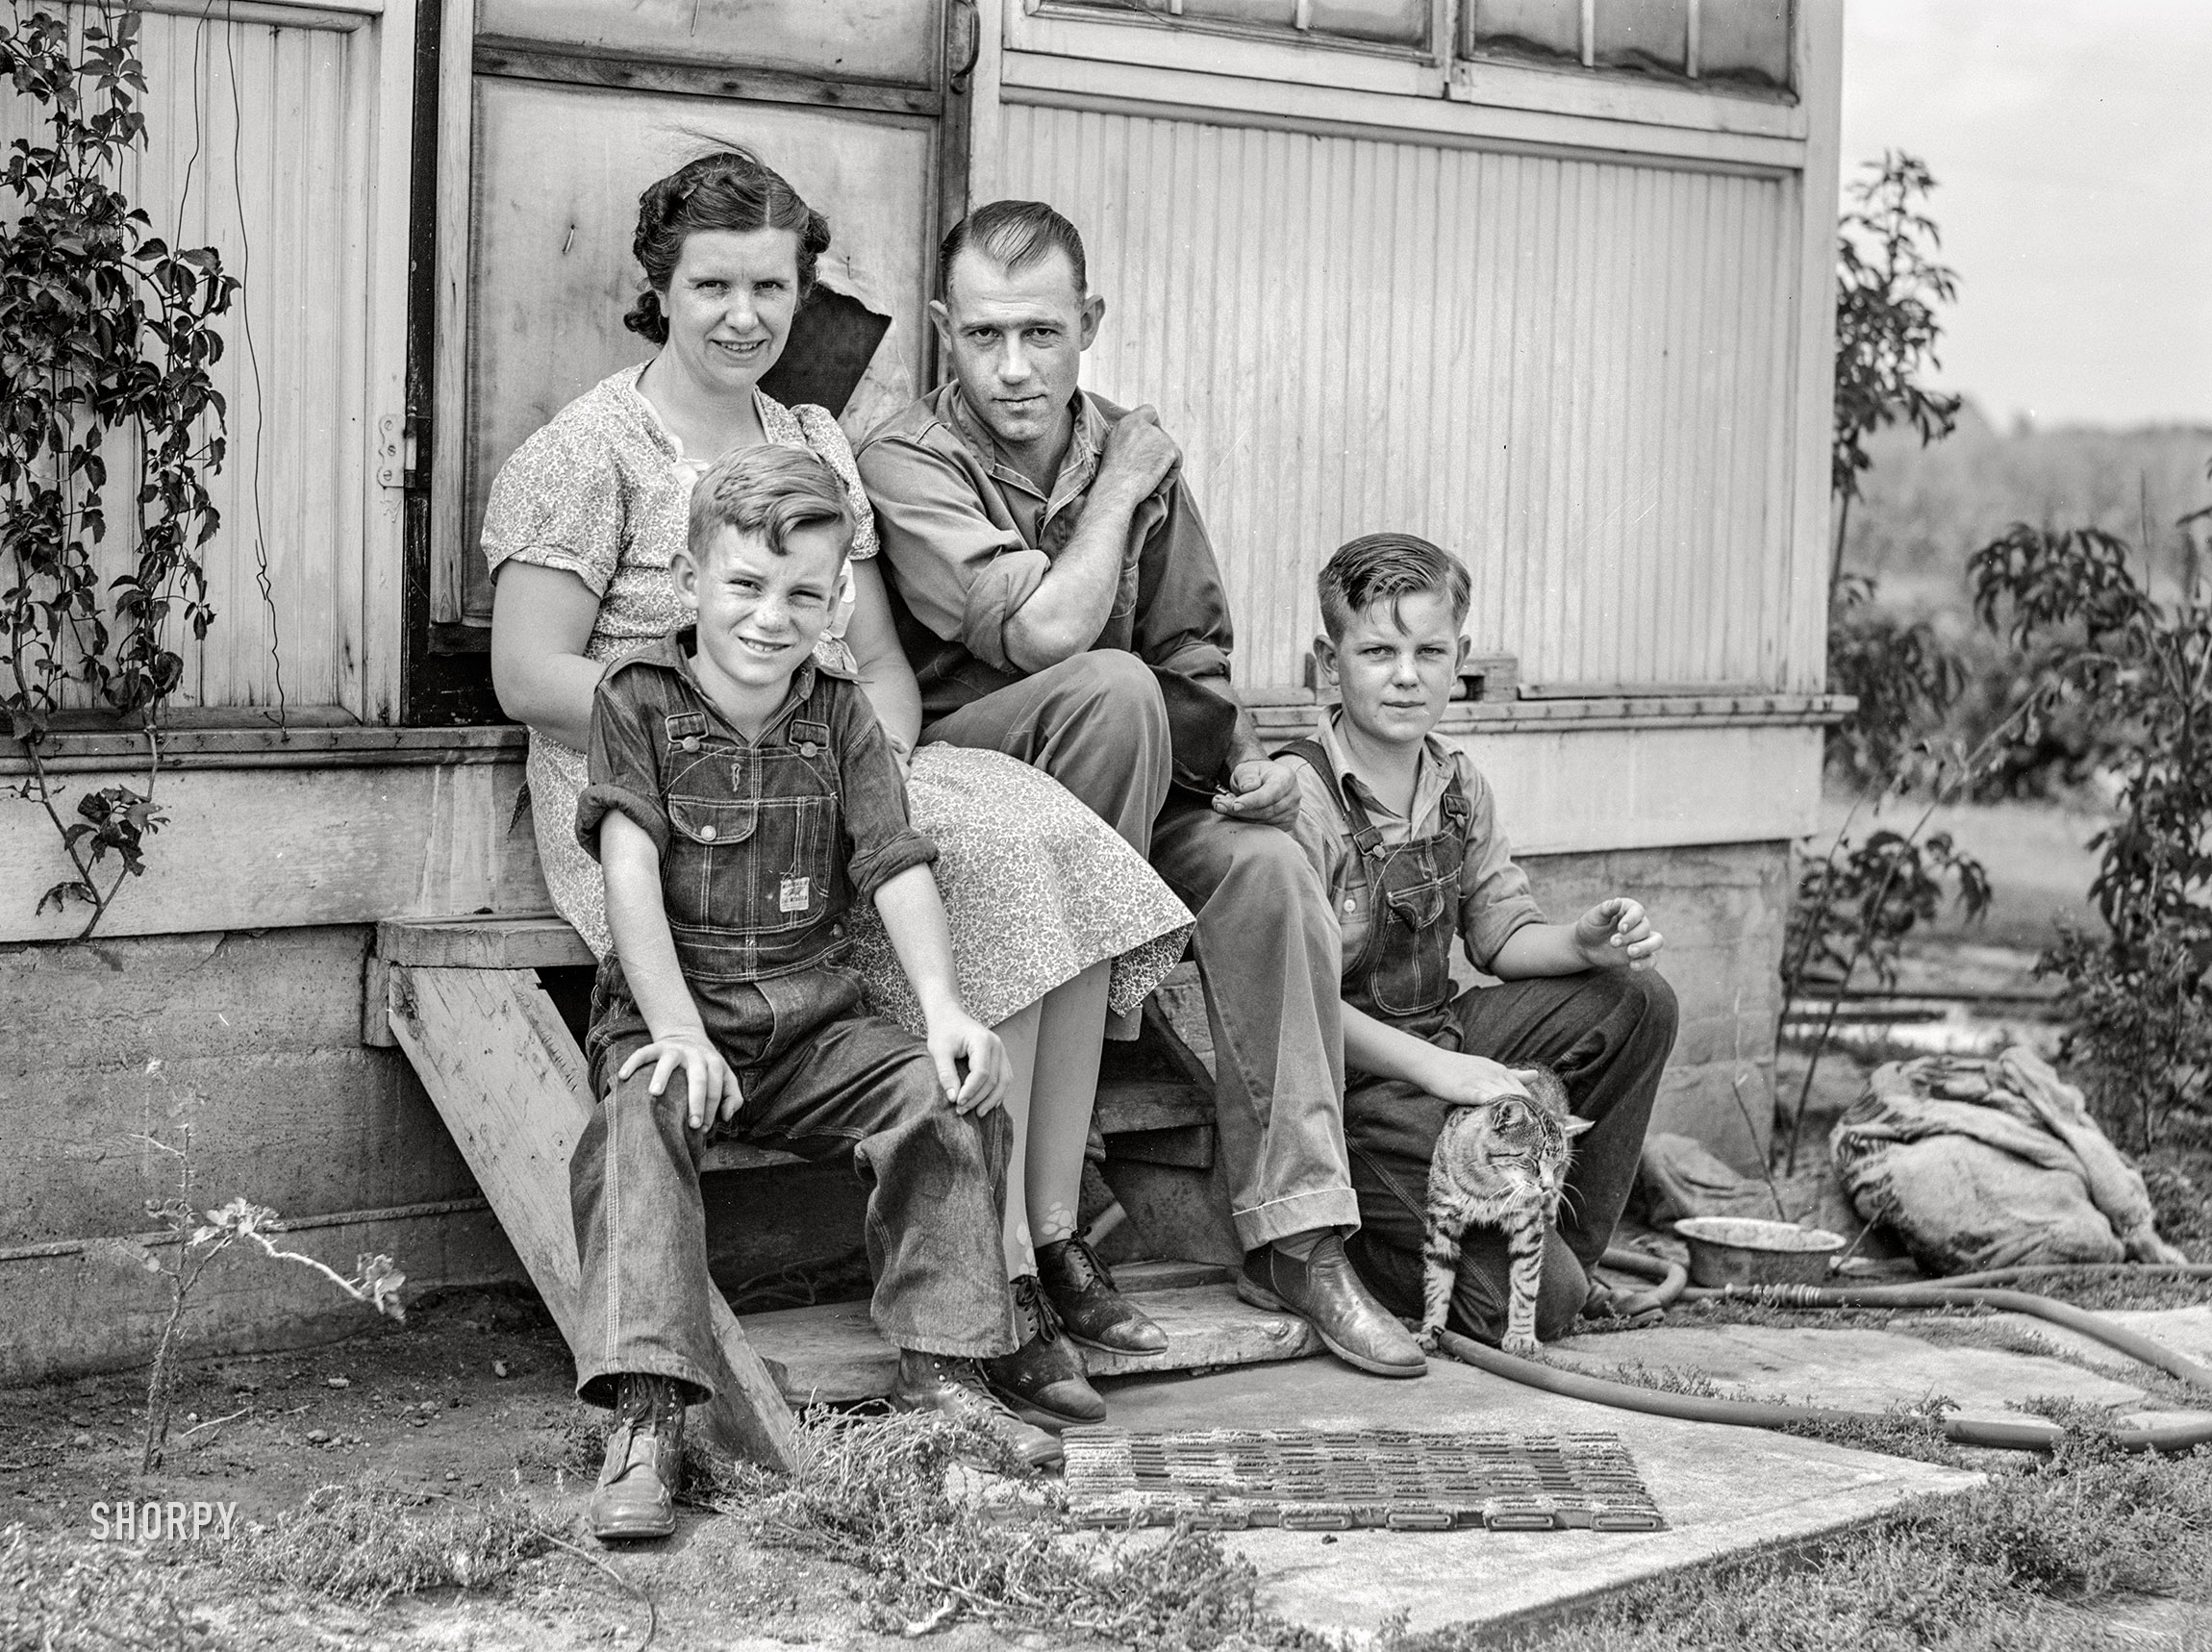 September 1941. "Mr. and Mrs. Harvey Renninger with sons Richard and Winfield, members of the Two River Non-Stock Cooperative, FSA co-op. Waterloo, Nebraska." Medium format acetate negative by Marion Post Wolcott for the Farm Security Administration. View full size.